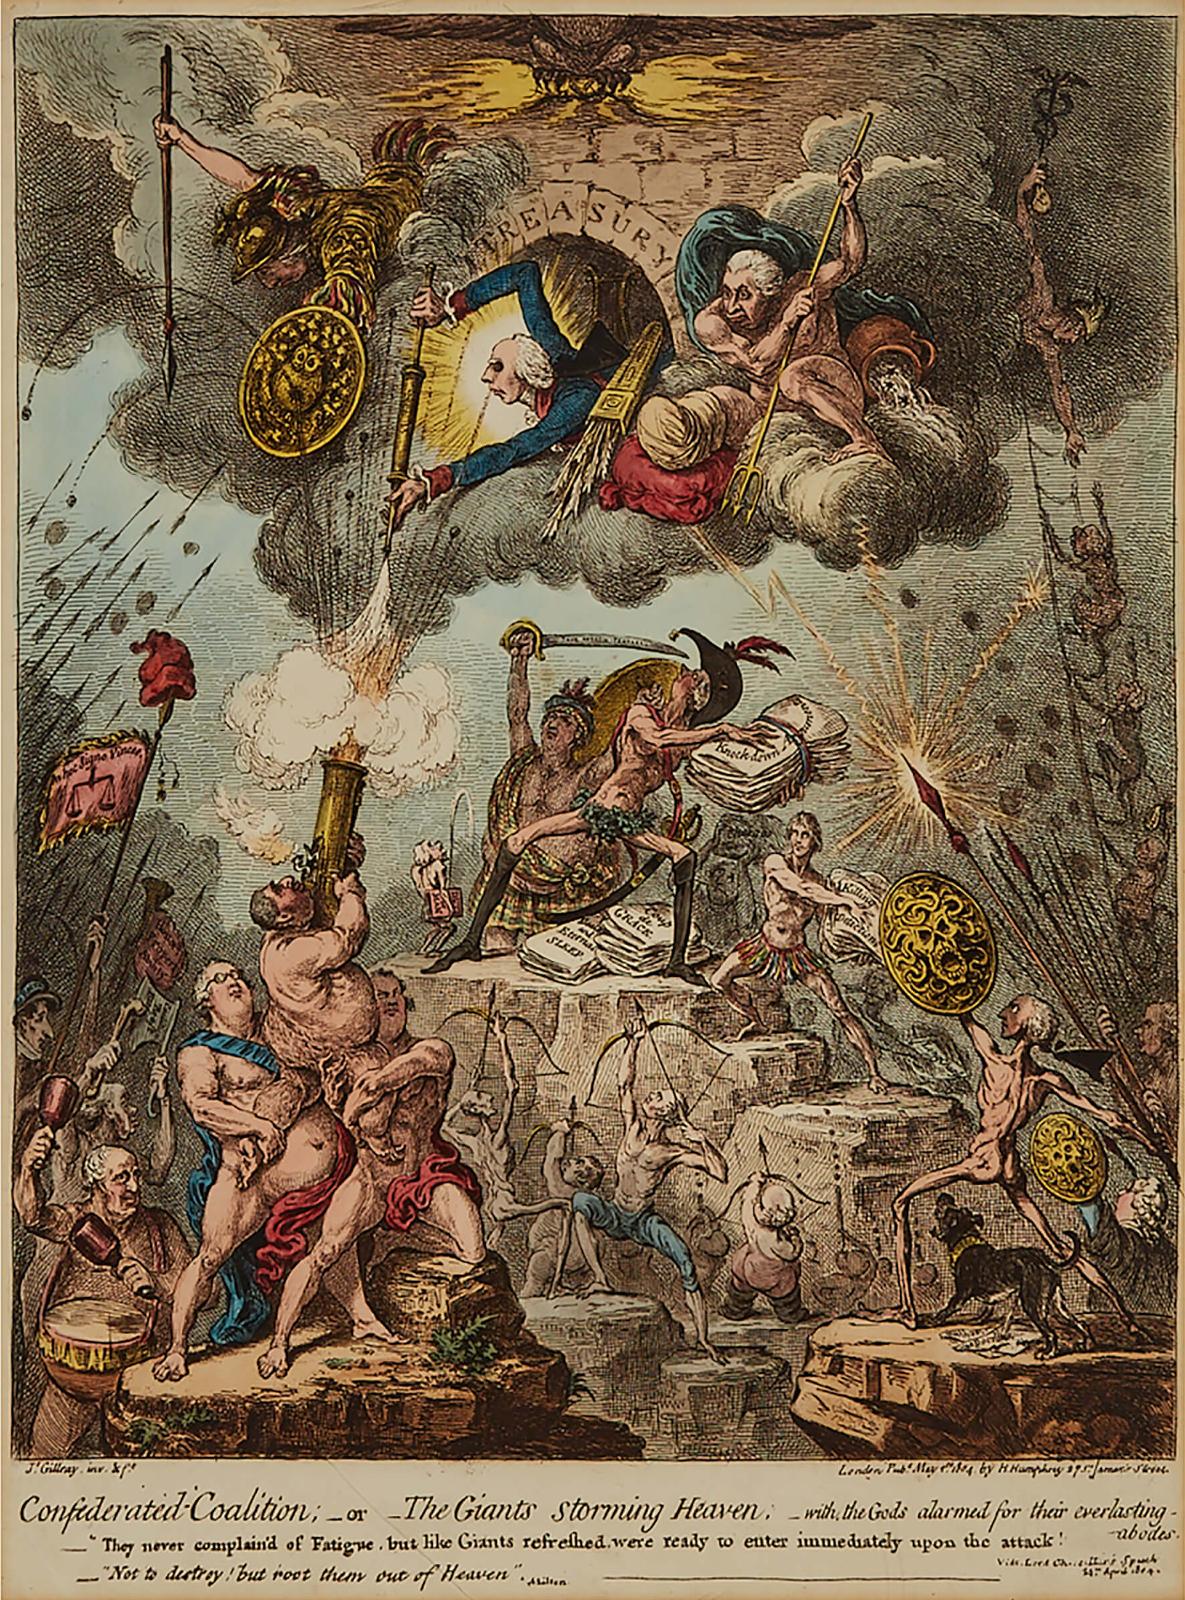 James Gillray (1757-1815) - Confederated-Coalition Or The Giants Storming Heaven, 1804 [george, 10240]